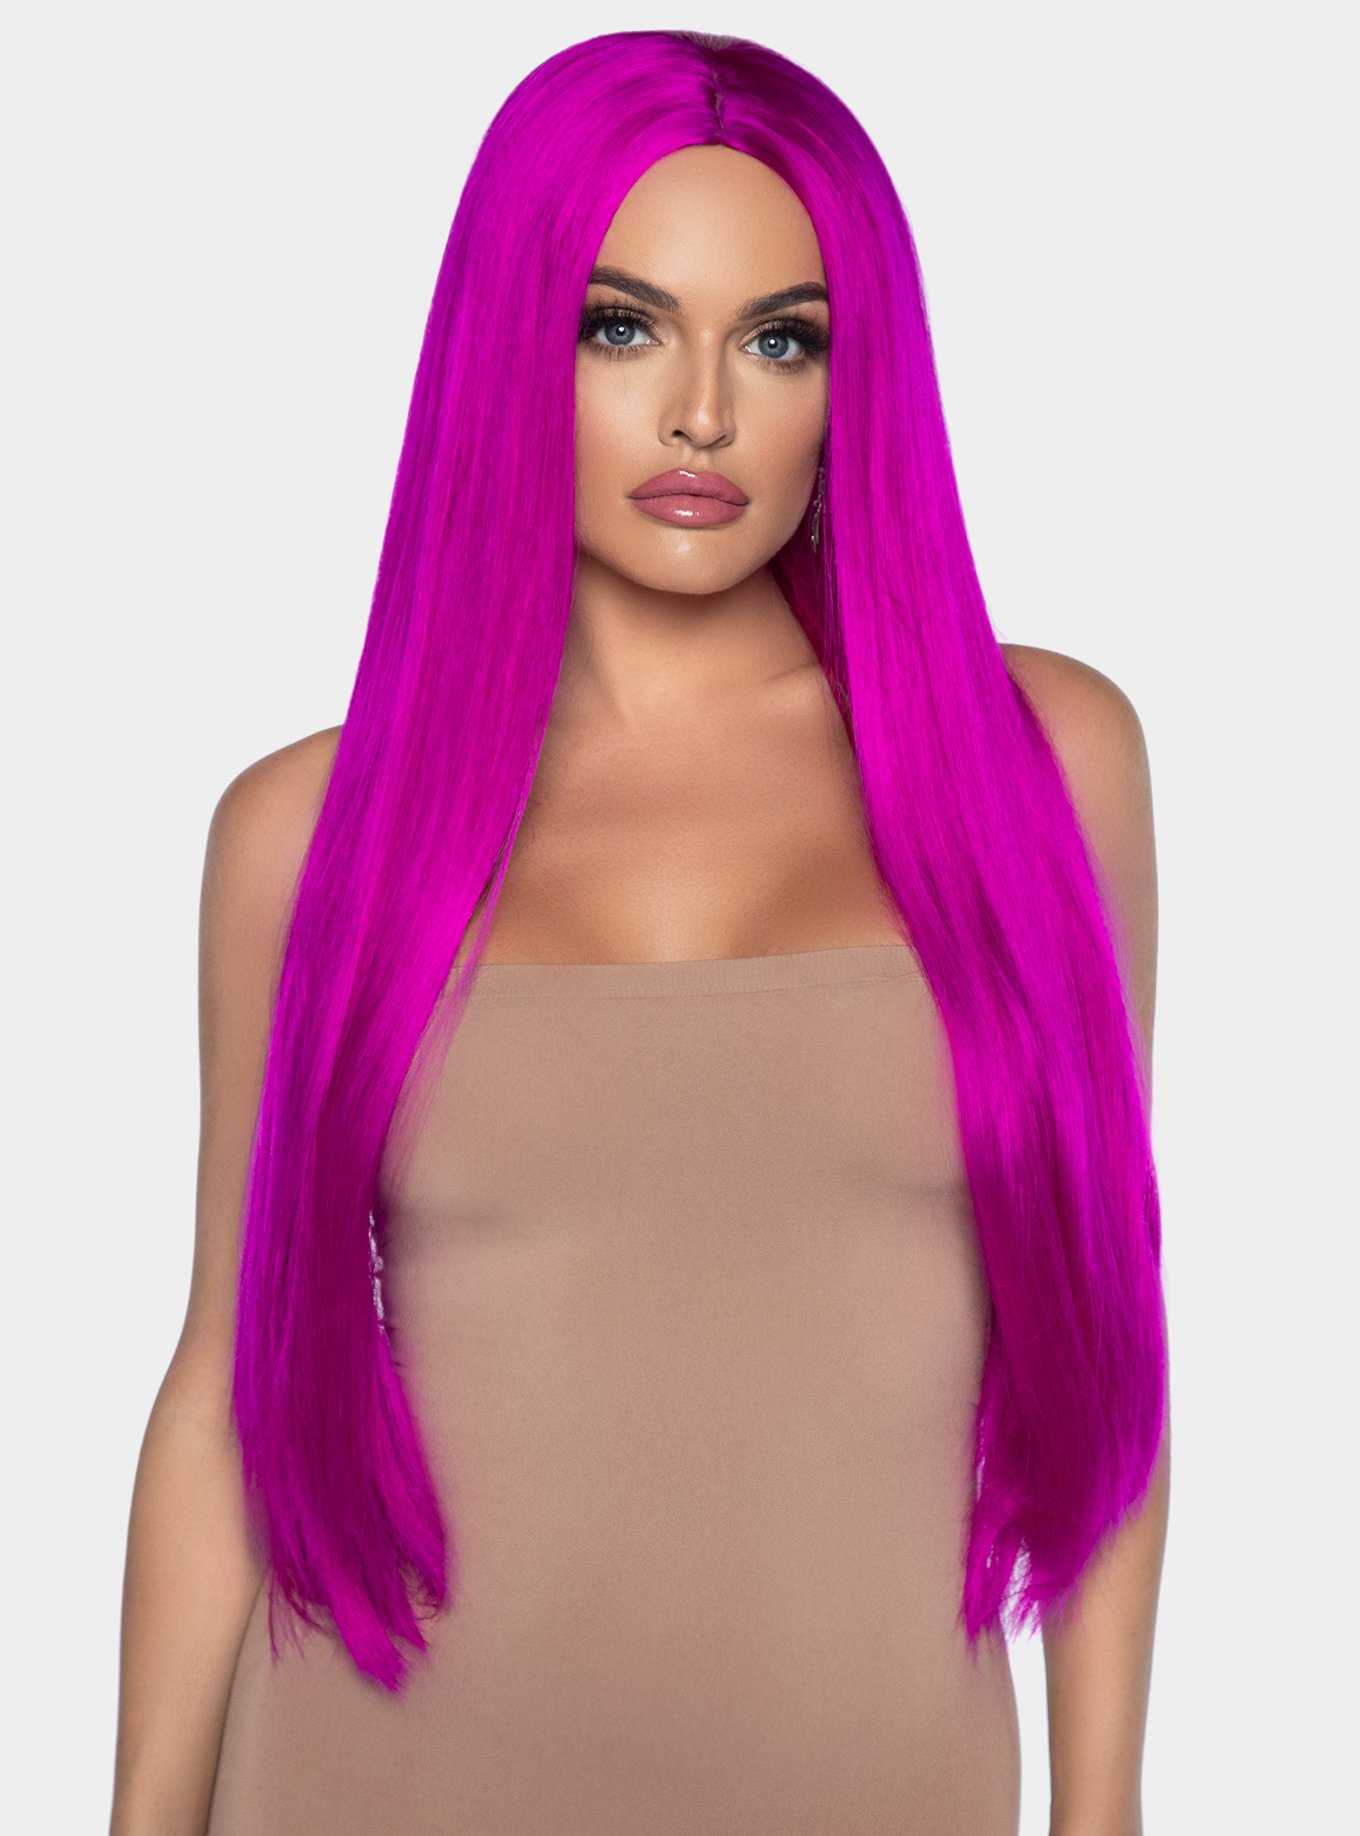 Long Straight Center Part Wig Neon Pink, , hi-res